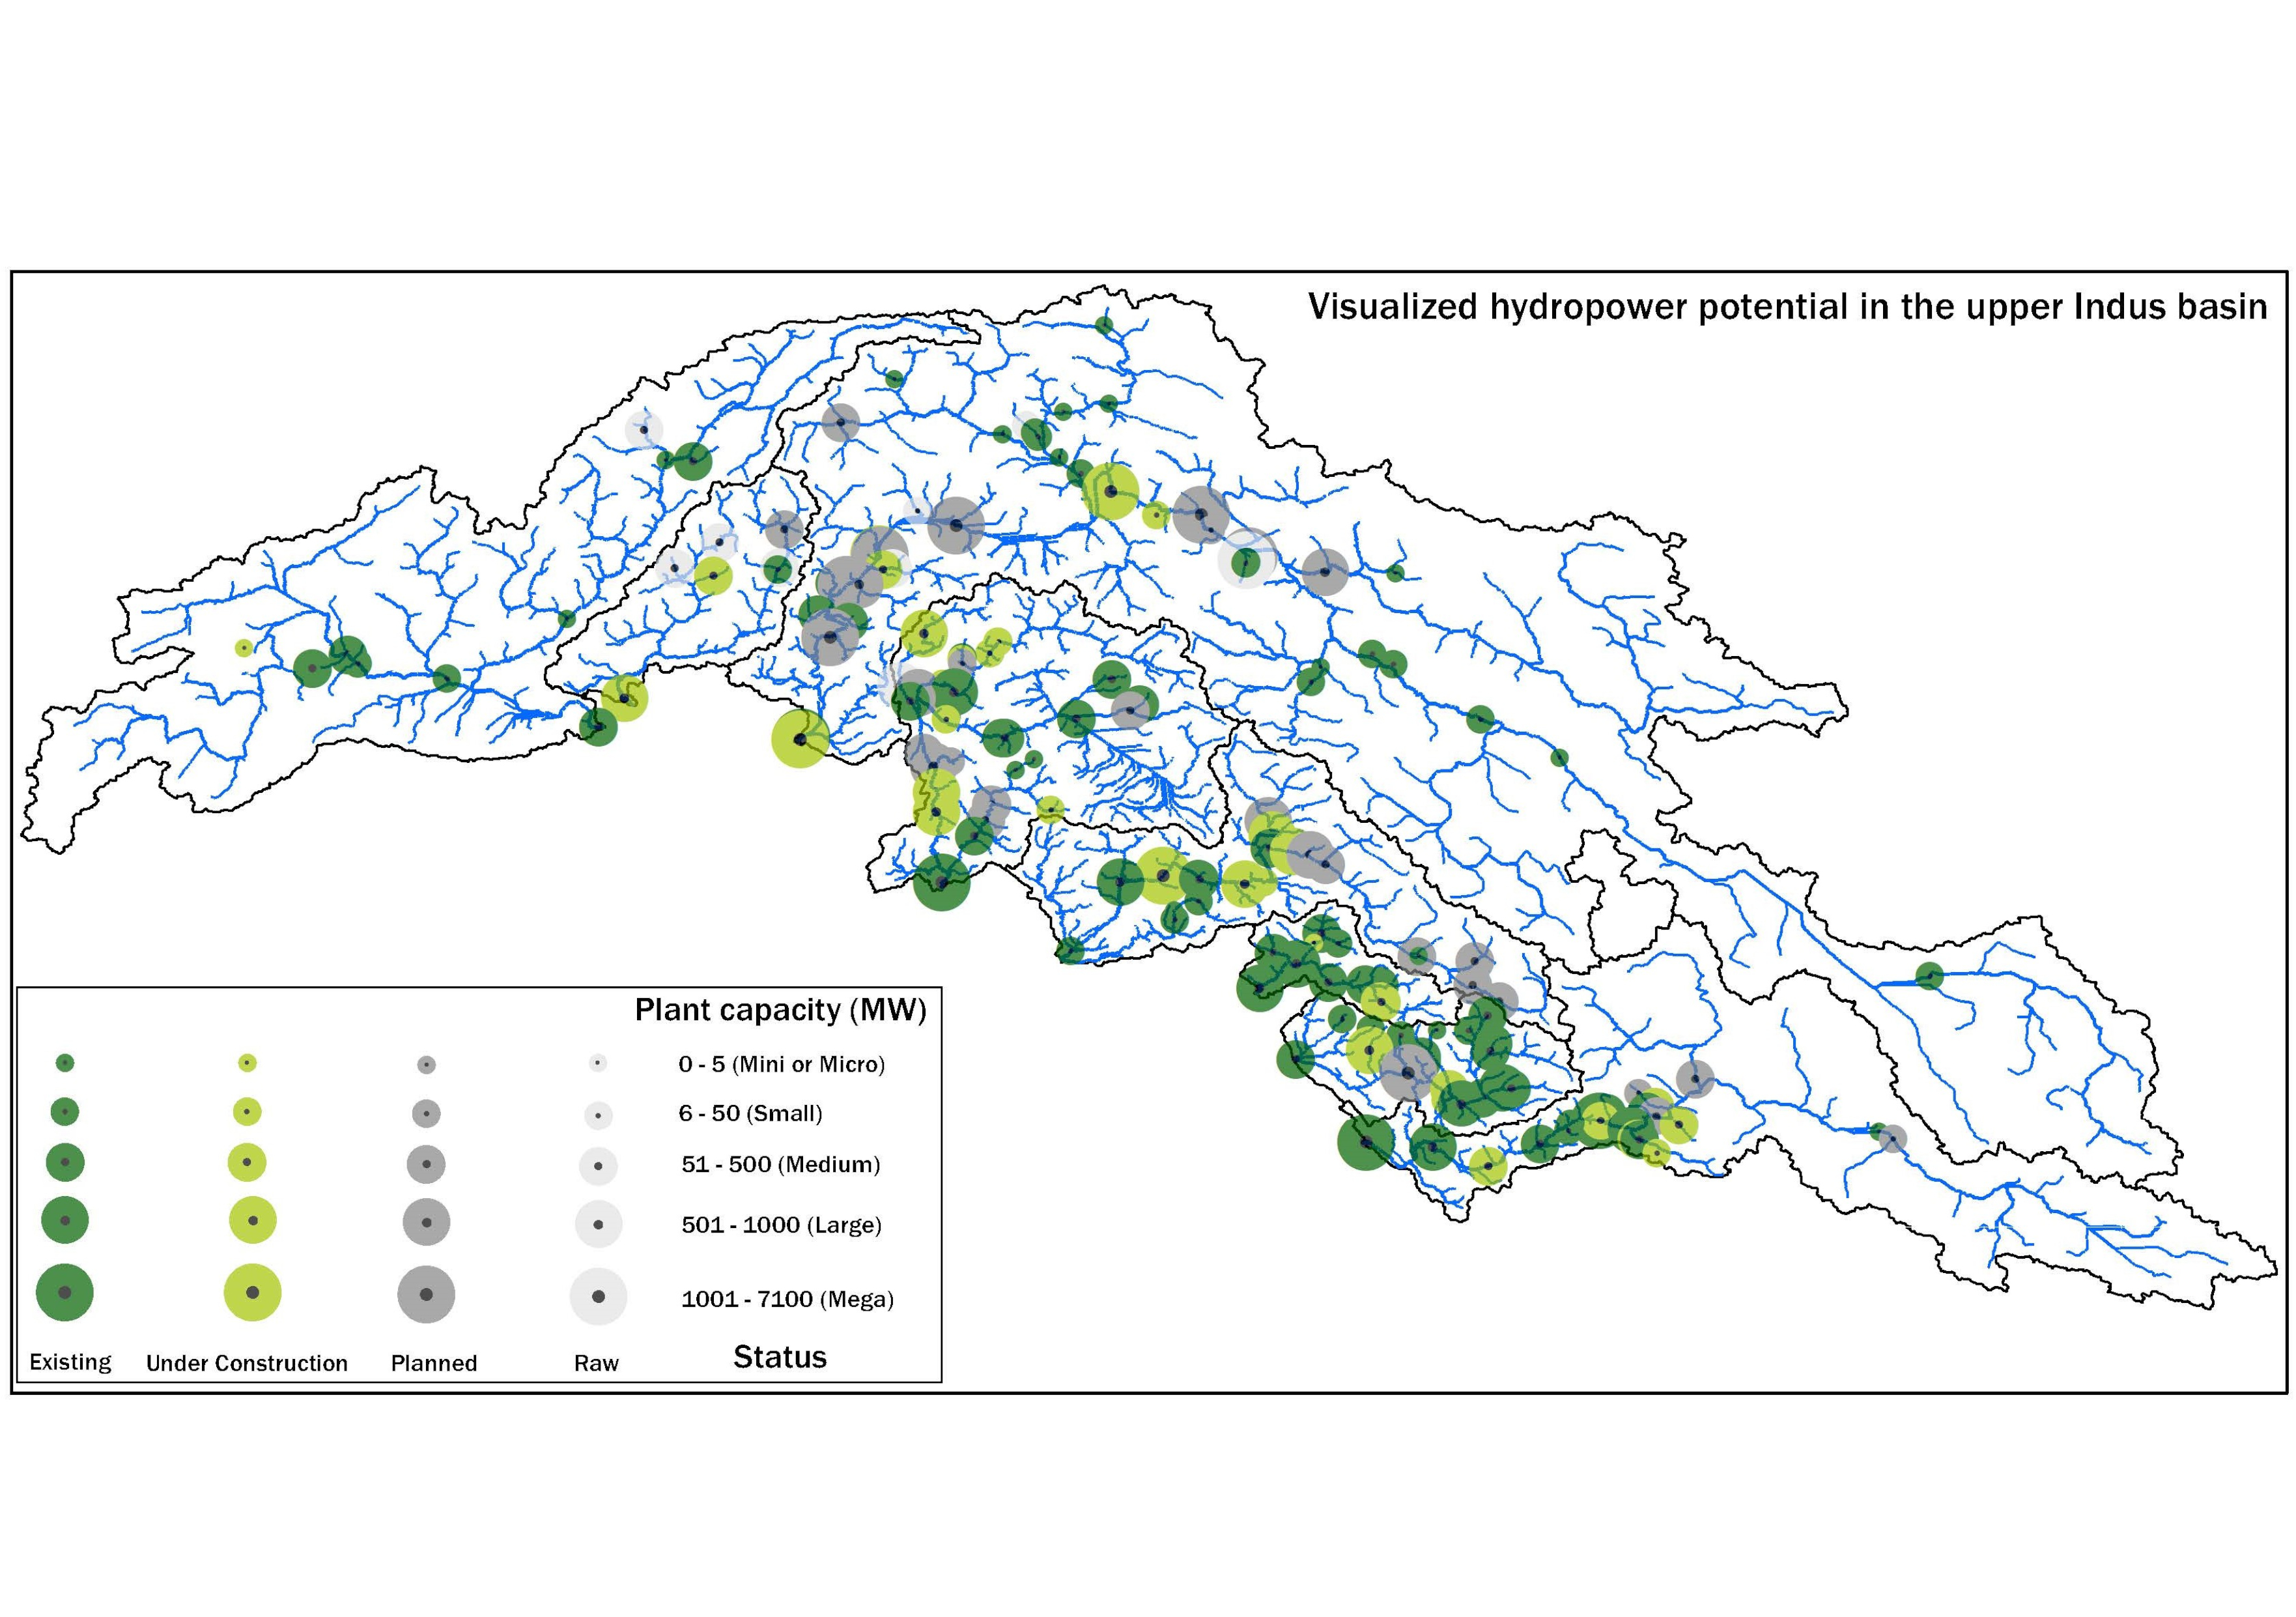 Inventory of visualized hydropower plants in the upper Indus basin